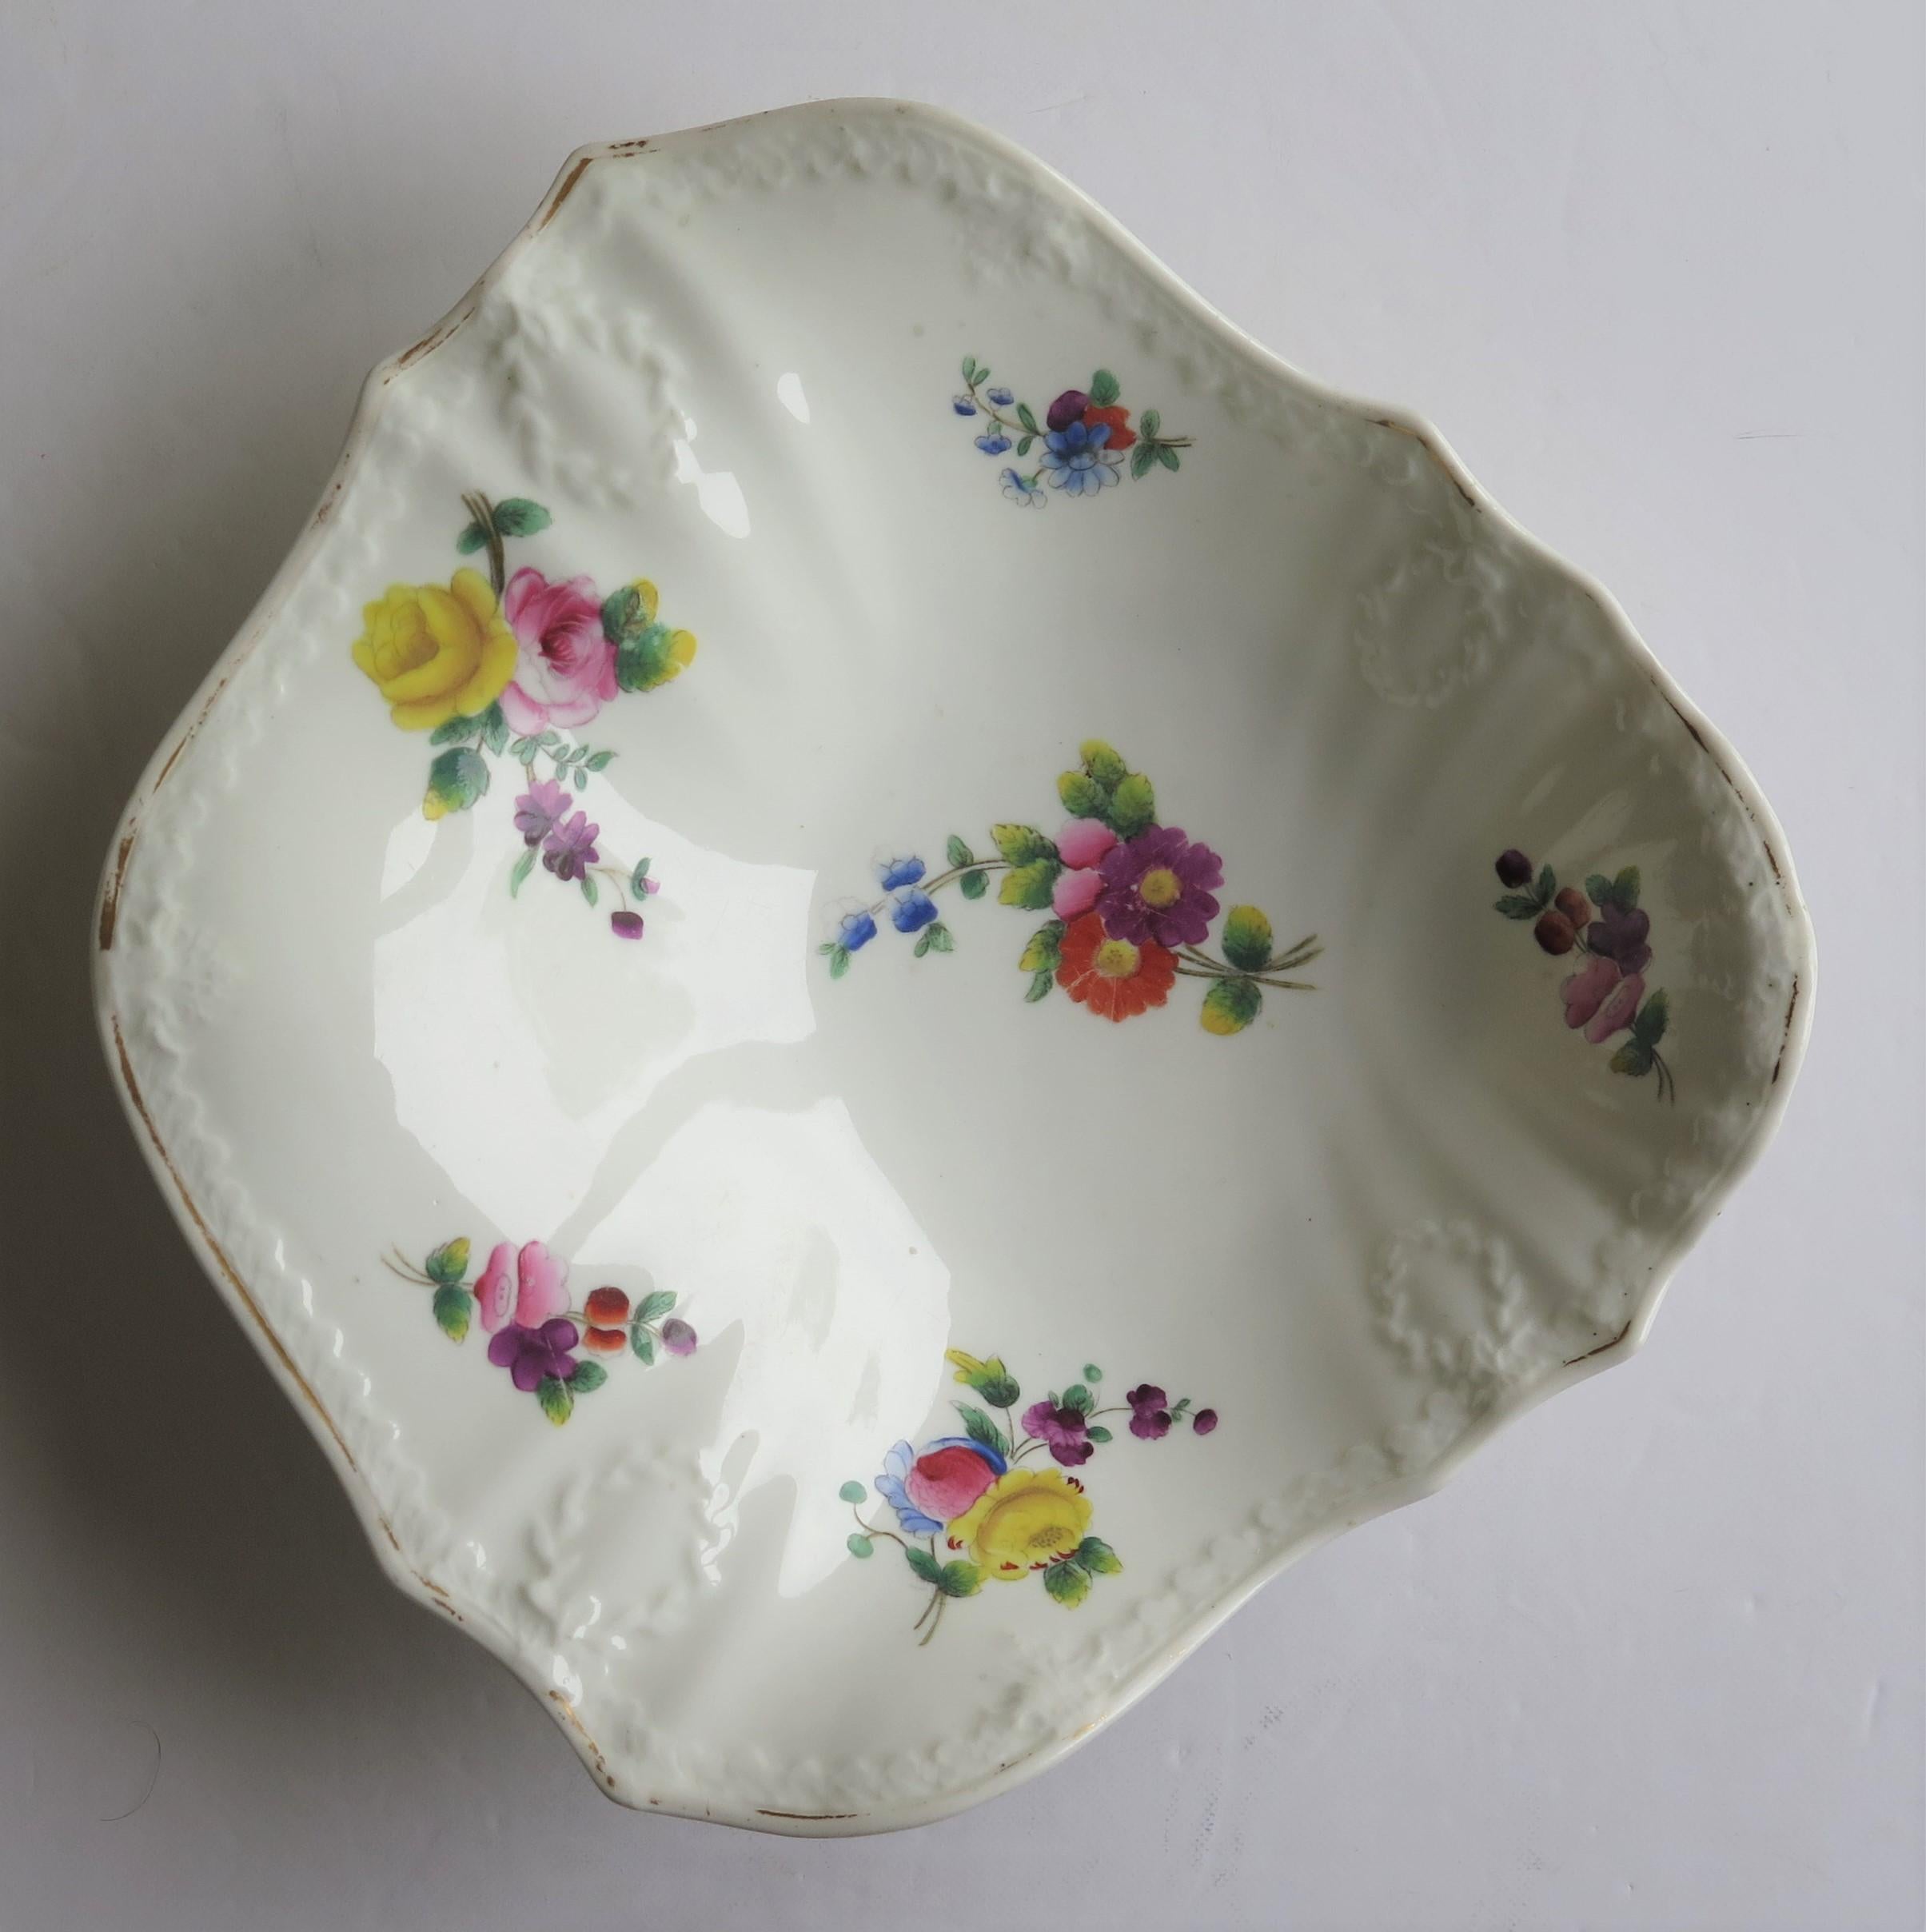 This is a fine porcelain Shell Dish, beautifully hand painted in pattern 3884 and made by H & R Daniel of London Road, Stoke, Staffordshire Potteries, England.

Pieces by H & R Daniel are beautifully decorated and sought after, being very